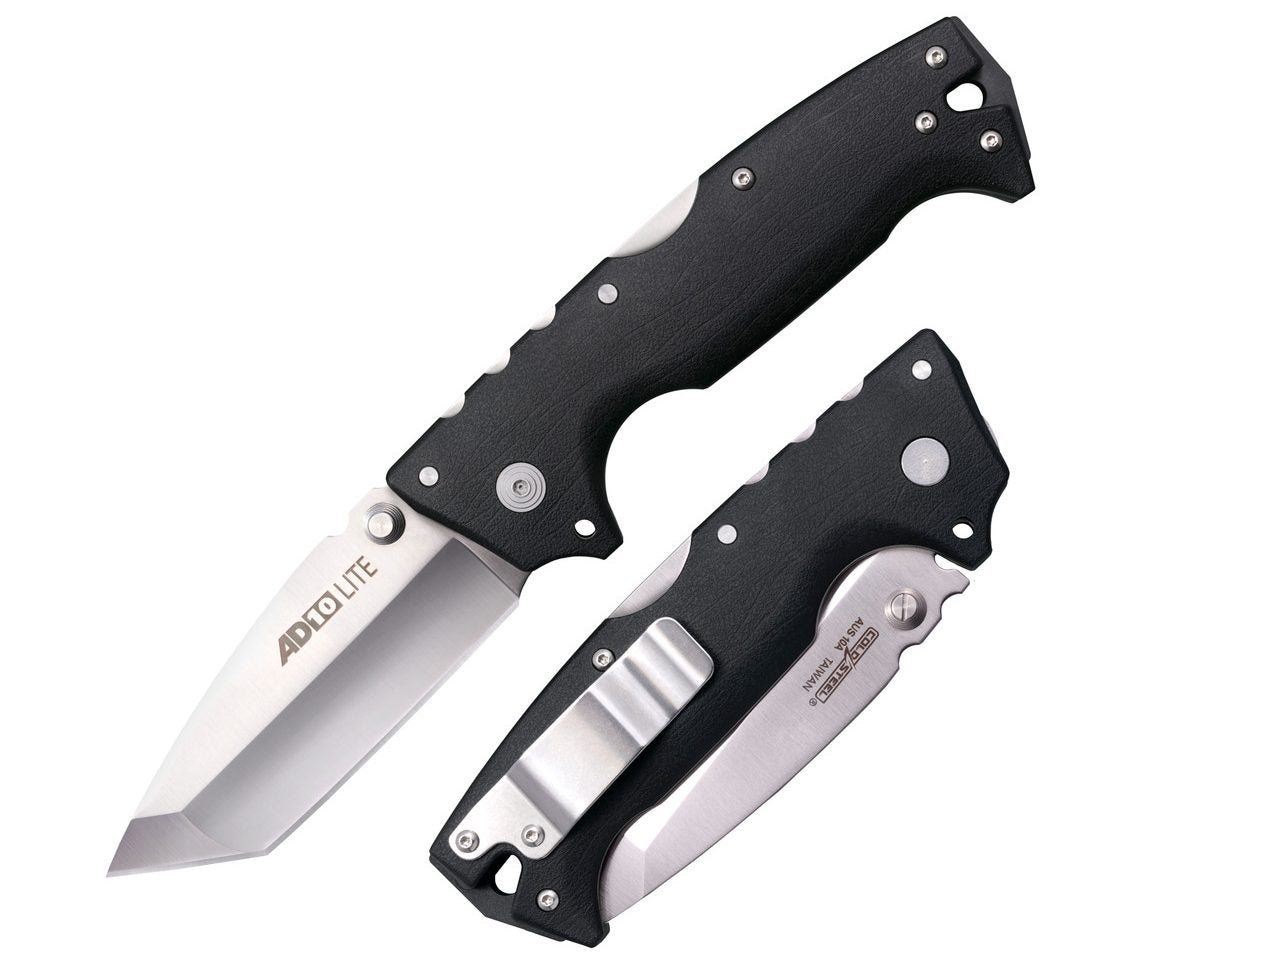 New AD-10 Lite Drop Point and Tanto Blades from Cold Steel